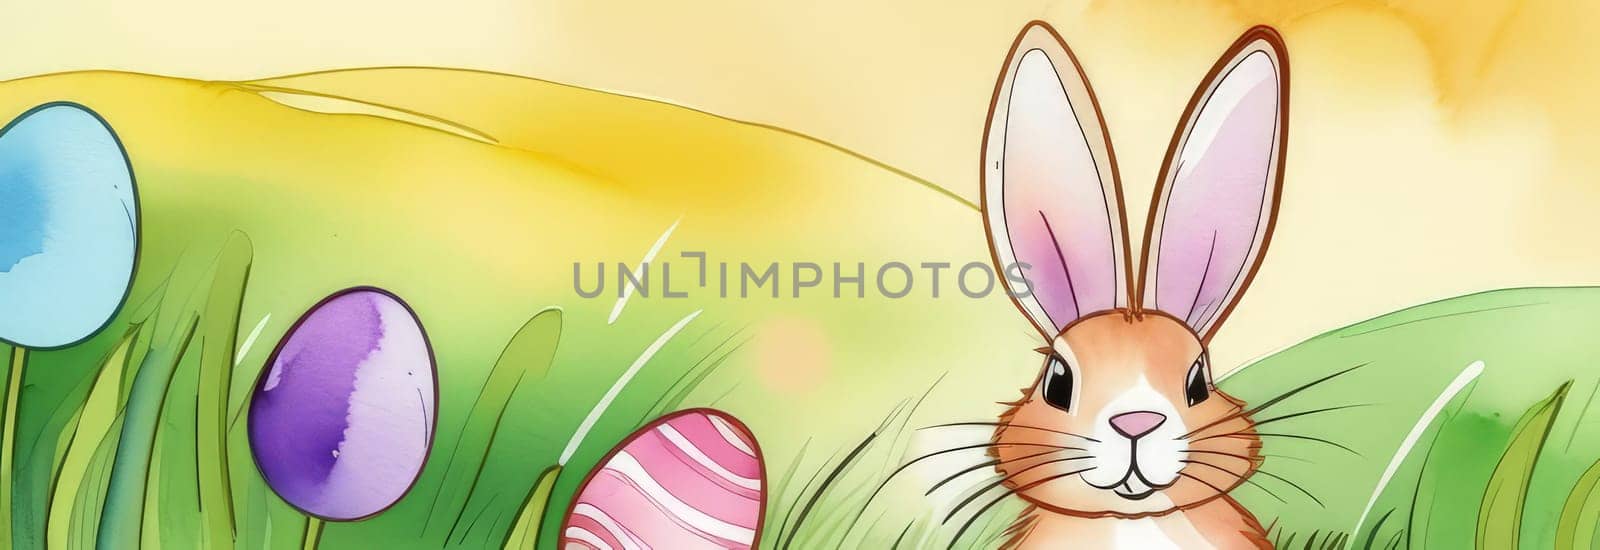 Holiday celebration banner with cute Easter bunny with decorated eggs and spring flowers on green spring meadow. Rabbit in landscape. Happy Easter greeting card, banner, festive background.Copy space by Angelsmoon